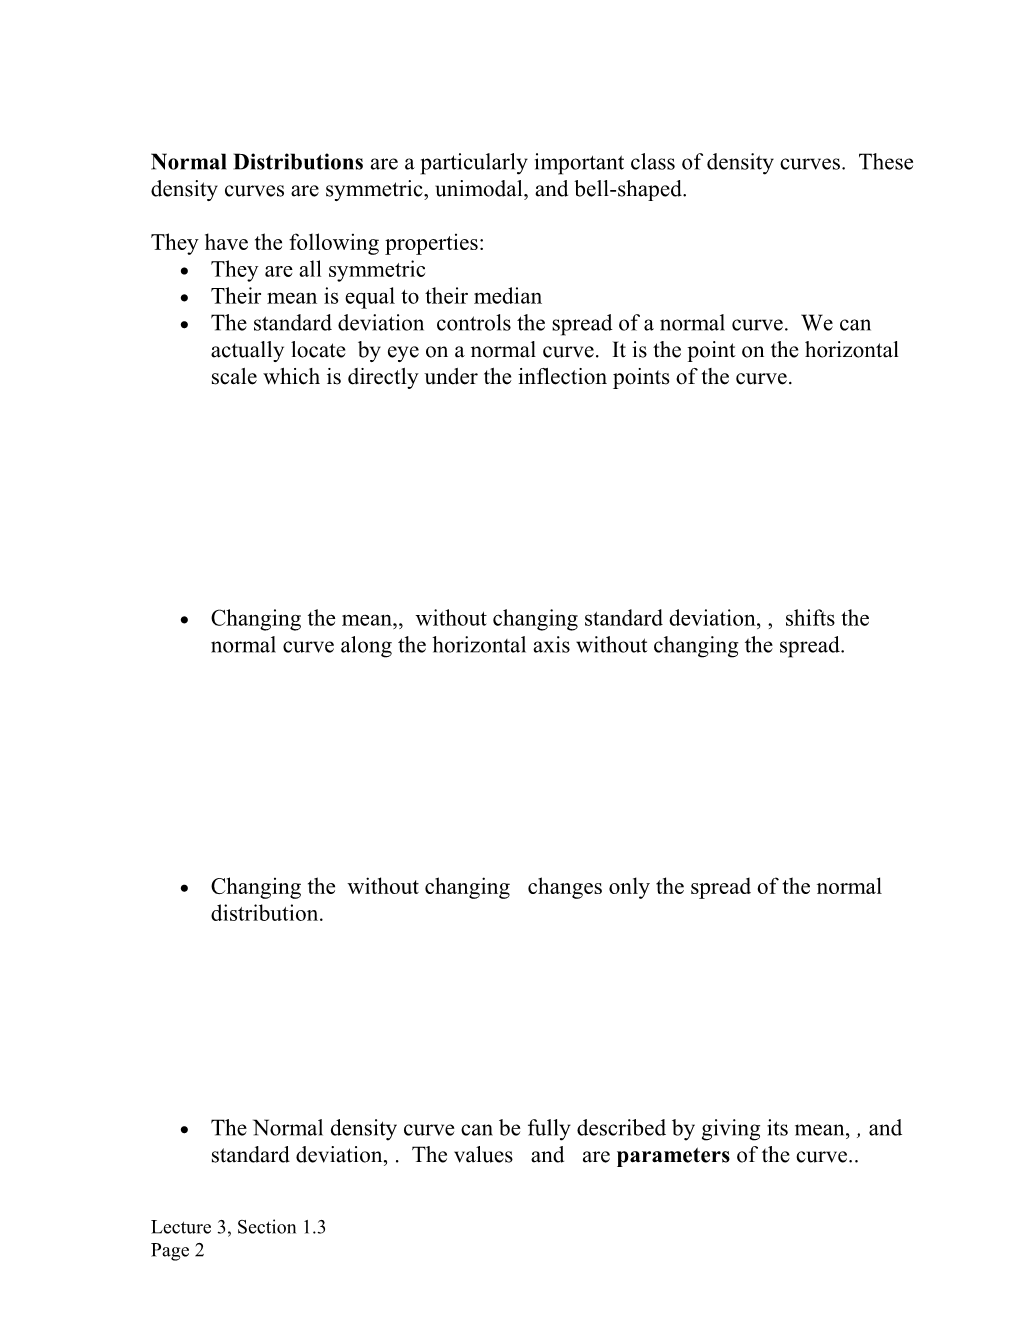 CHAPTER 1, Section 1.3 Revised Feb 2, 2012